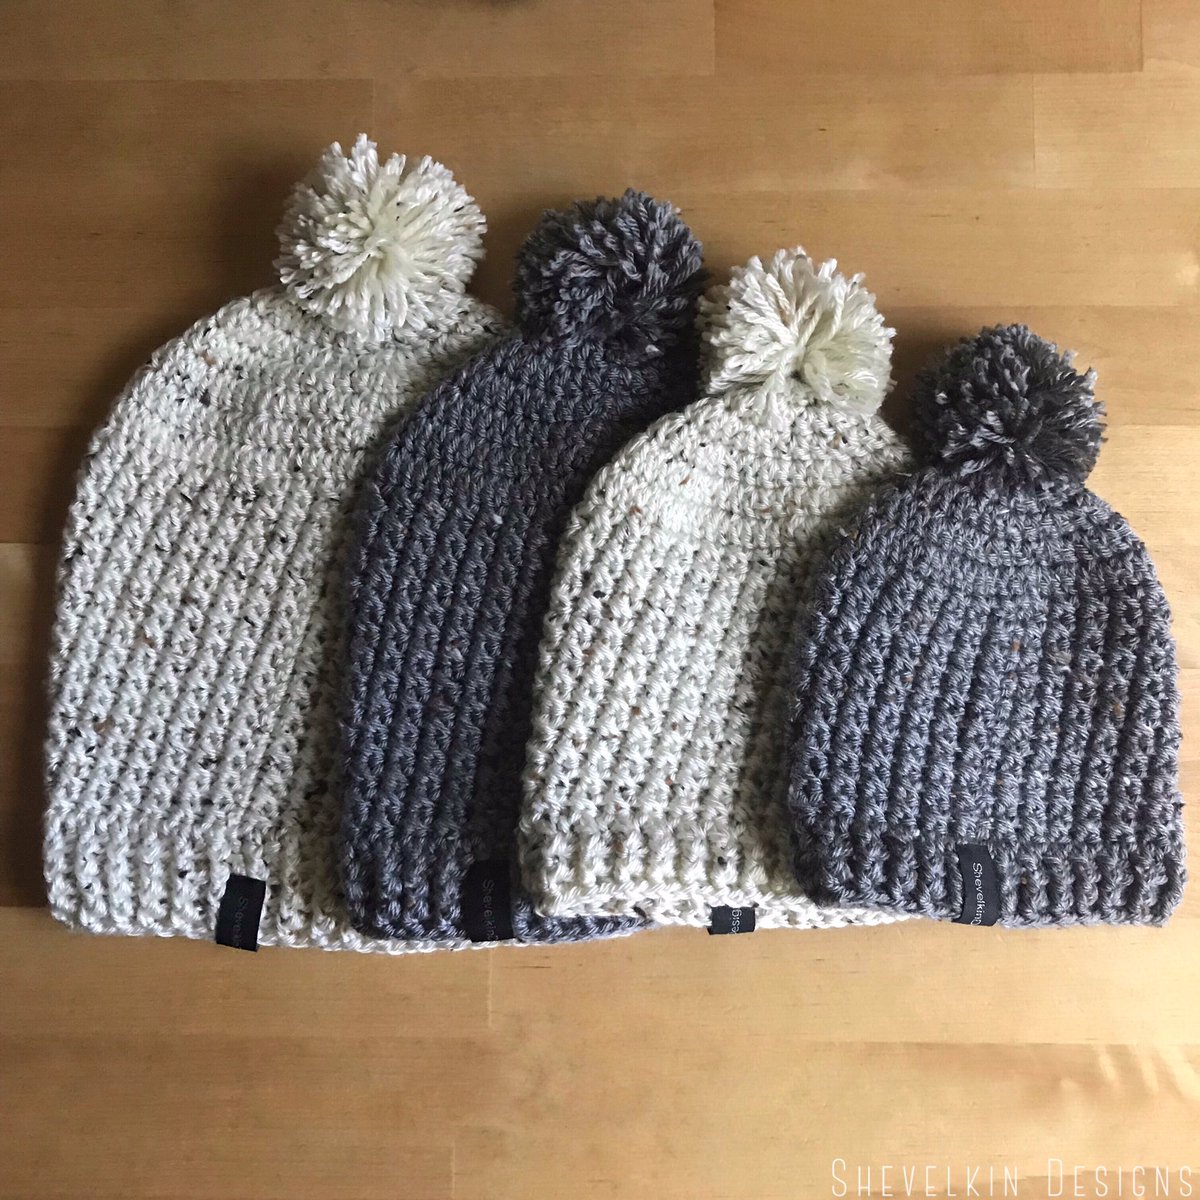 Stacks of winter hats! etsy.me/2OywzSQ 🖤 READY TO SHIP🖤 NB through Adult sizes #winteriscoming are you ready? #handmade #crochet #toque #pompomhat #beanie #handmadehour #keepcozy #etsyfinds #christmasgift #giftideas @HandmadeHour #newborn #kids #mommyandme #slouchyhat